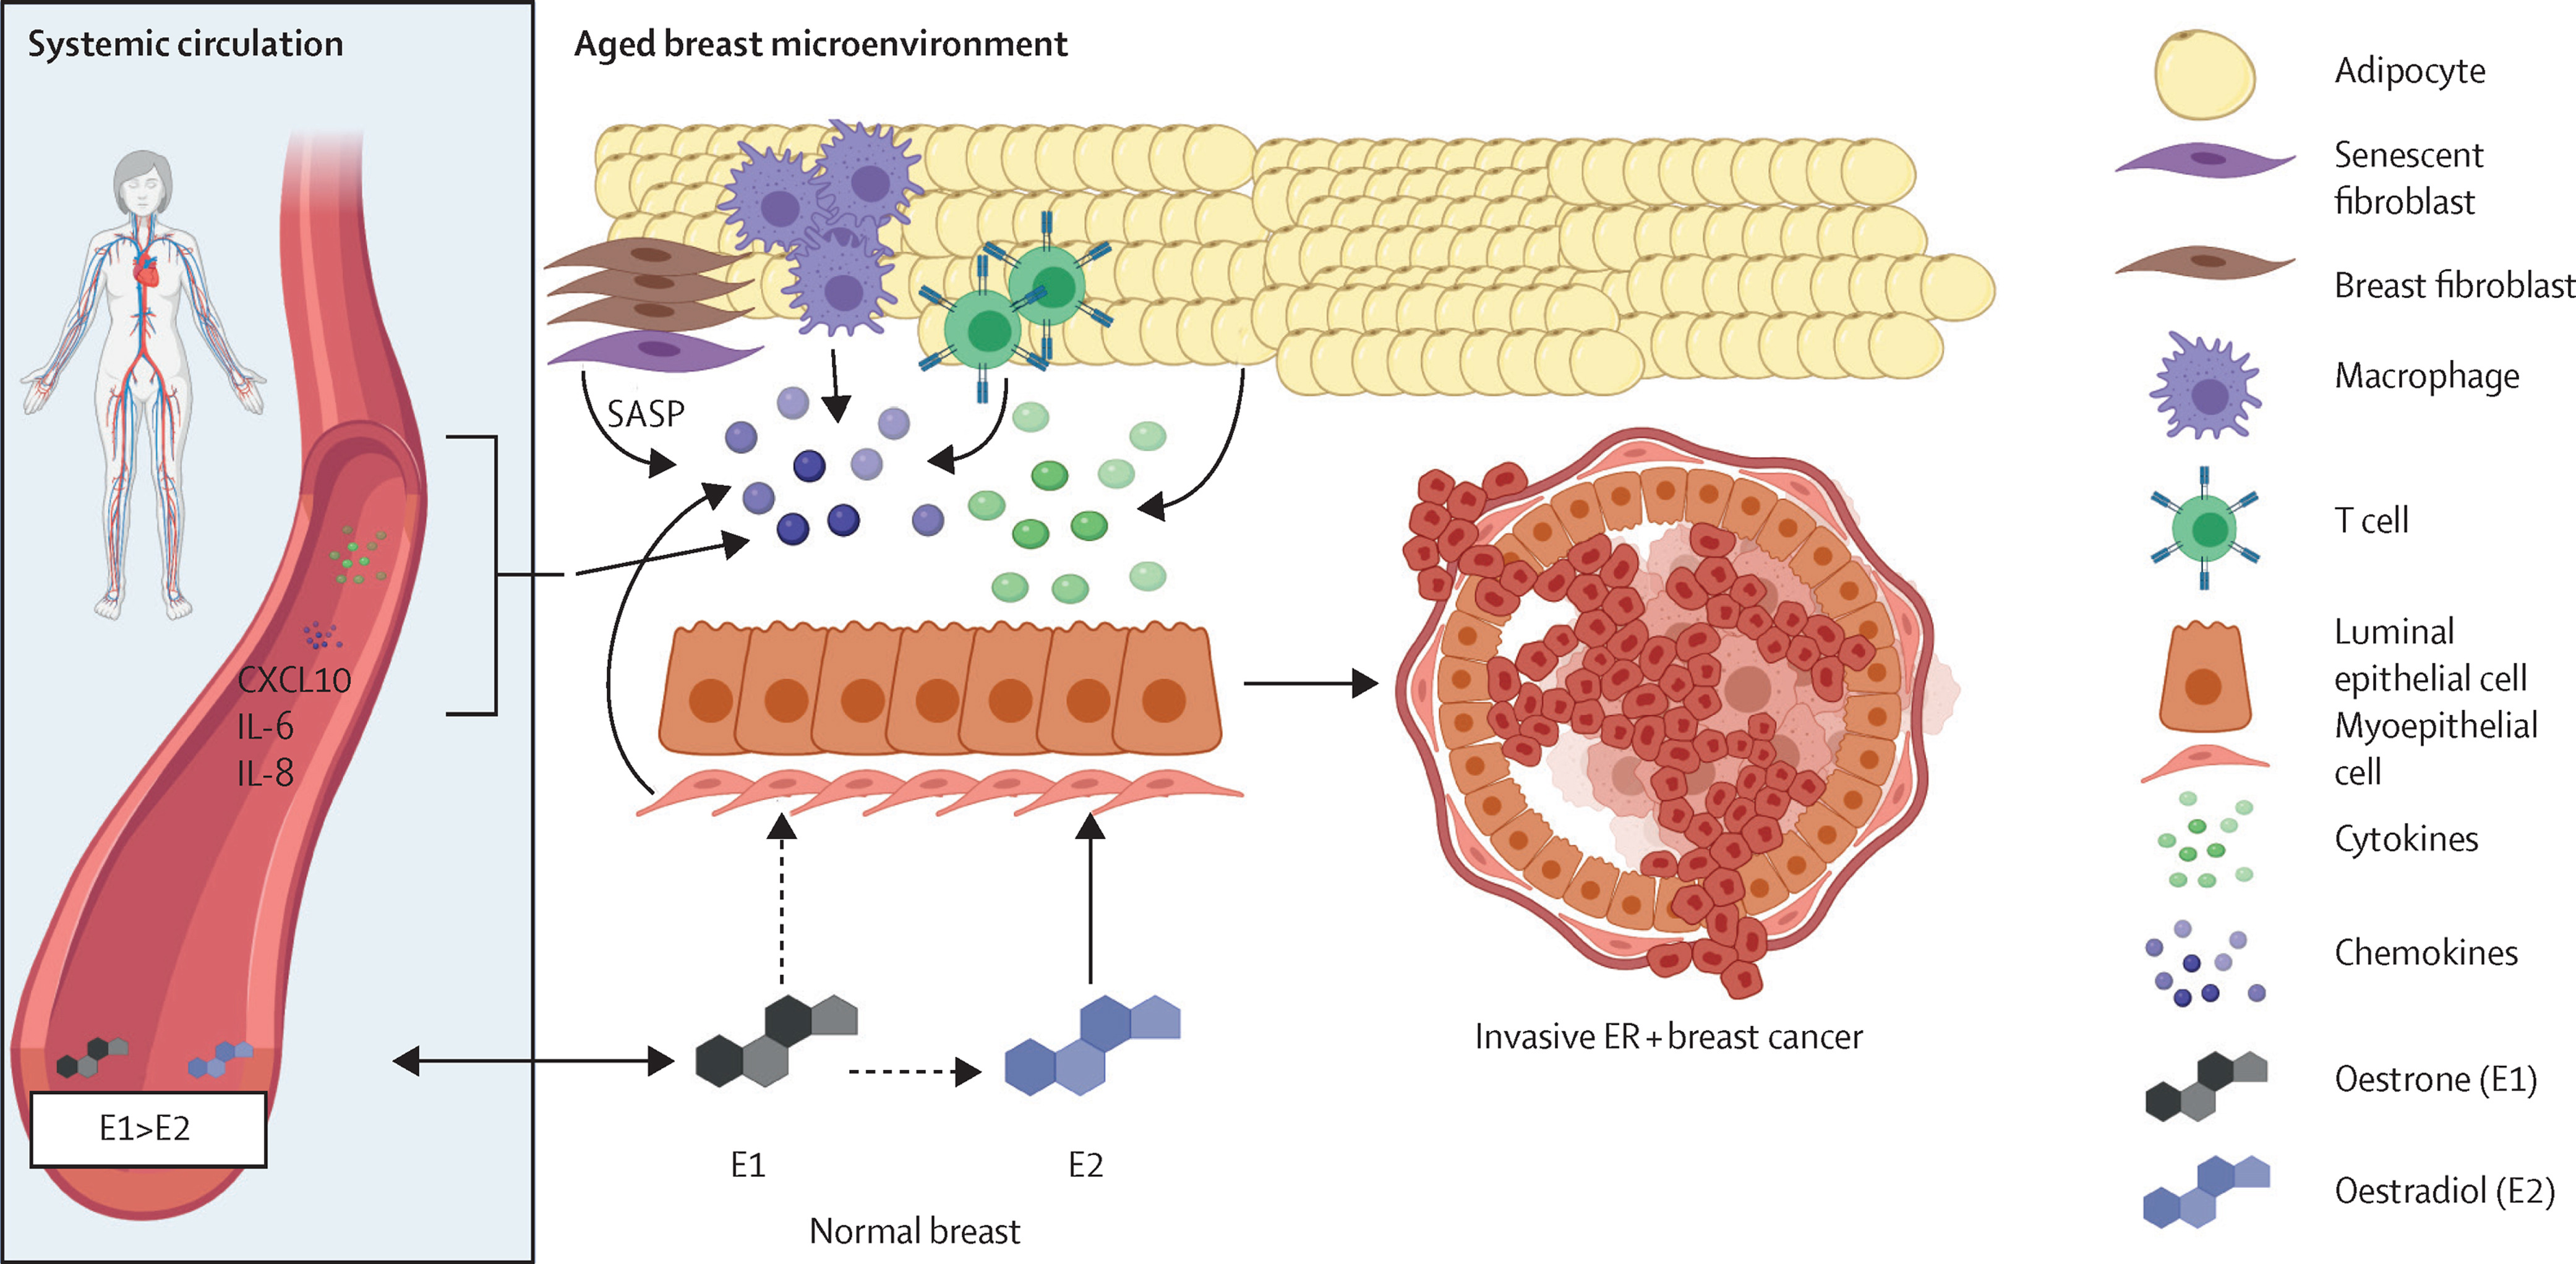 Figure 4. A systems biology view of the aged breast microenvironment